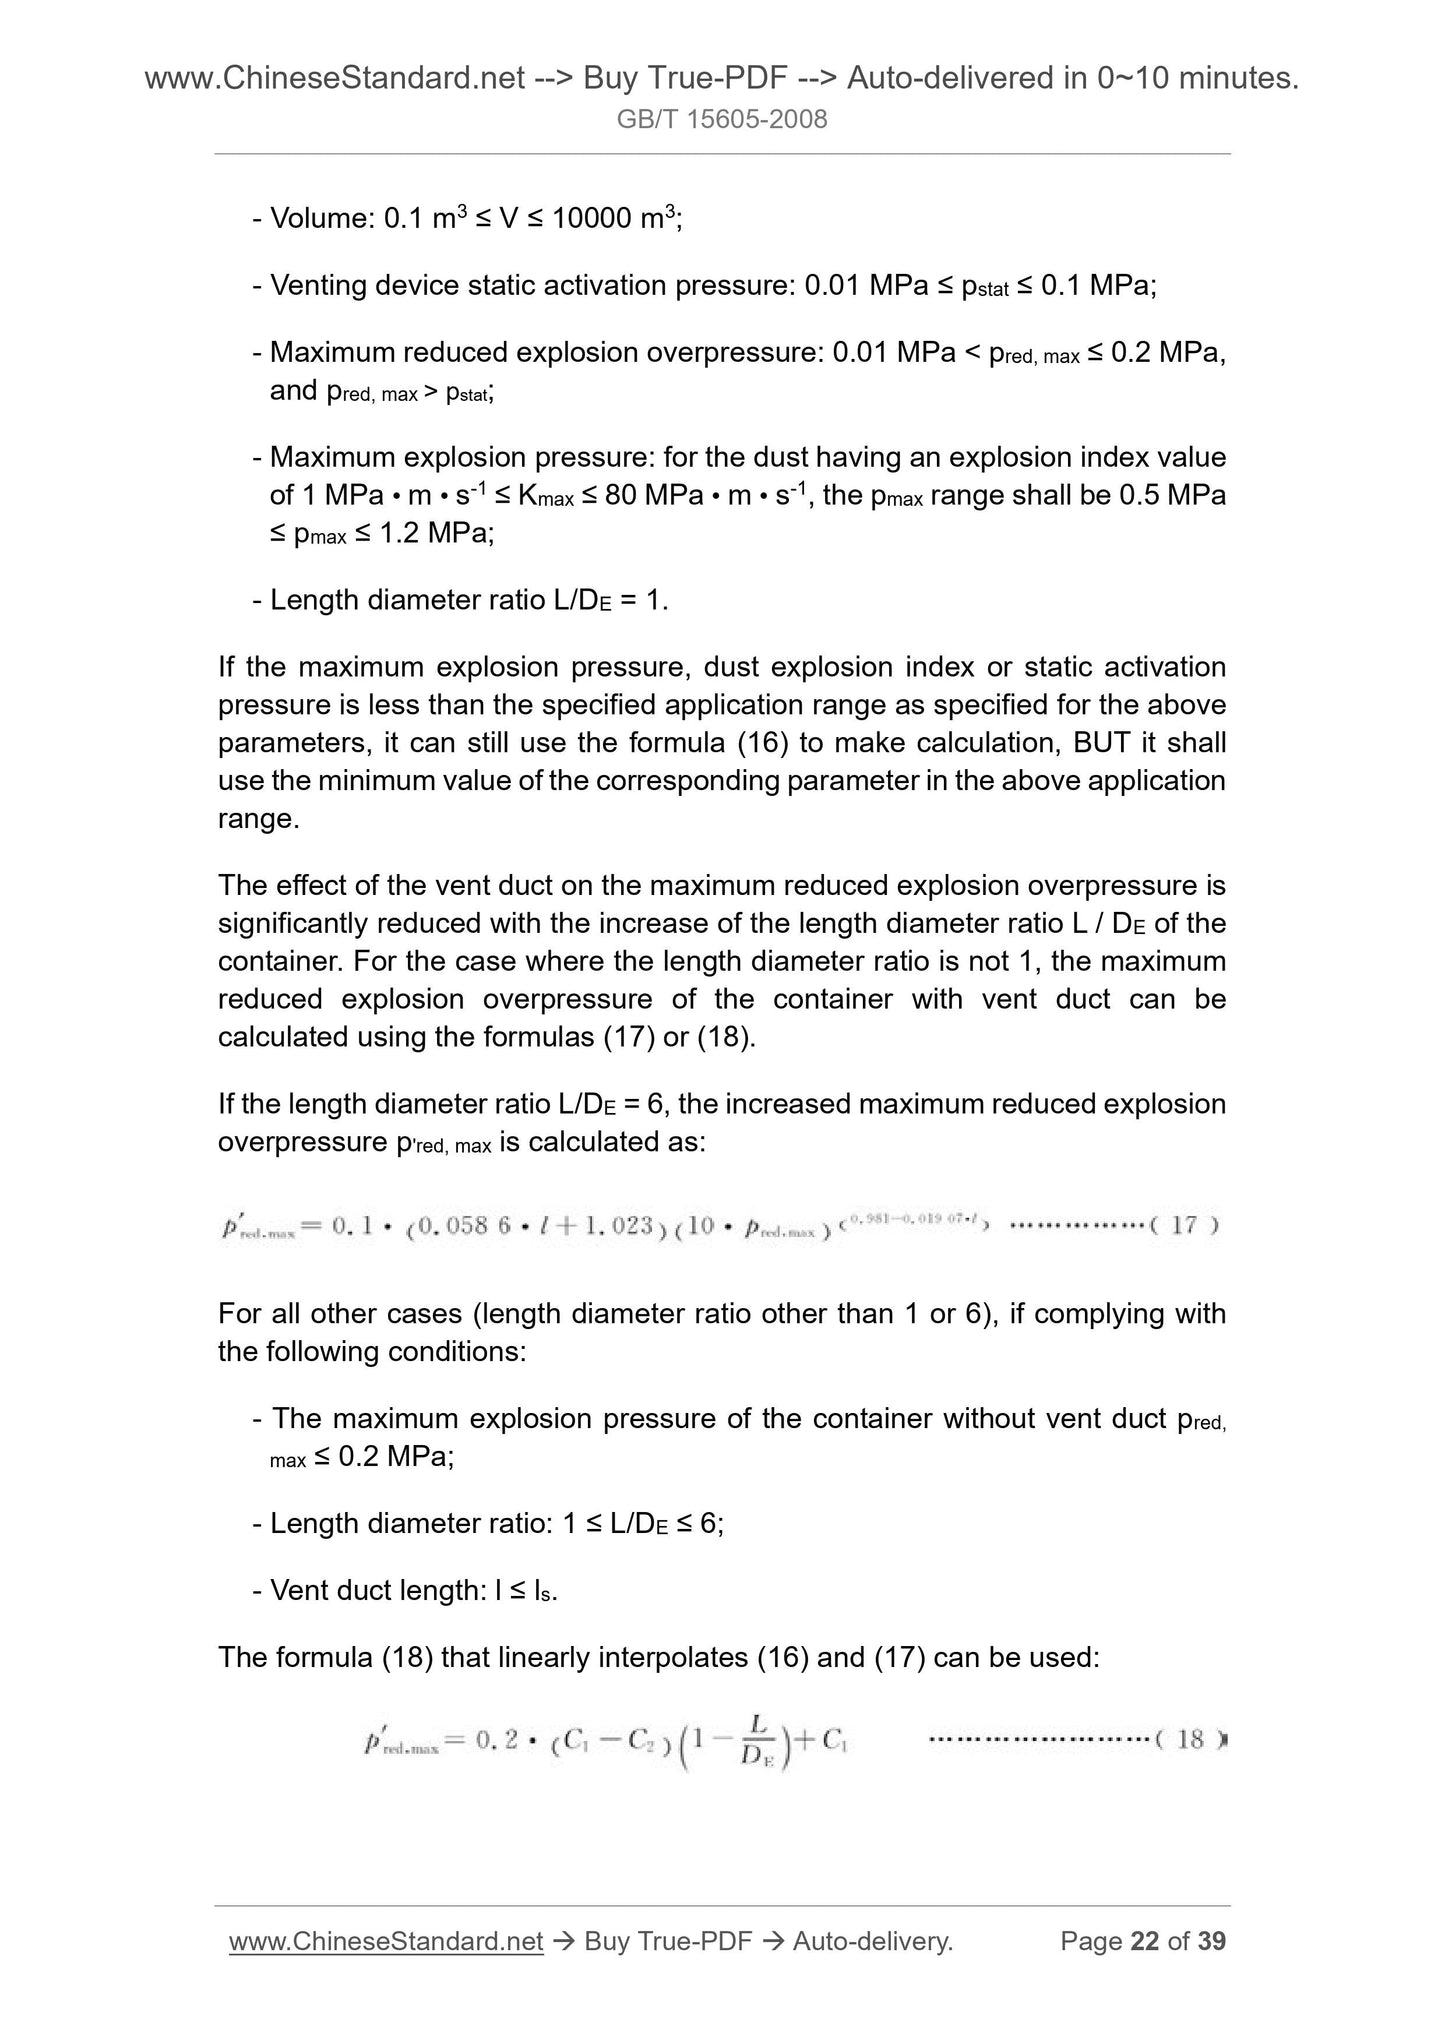 GB/T 15605-2008 Page 10